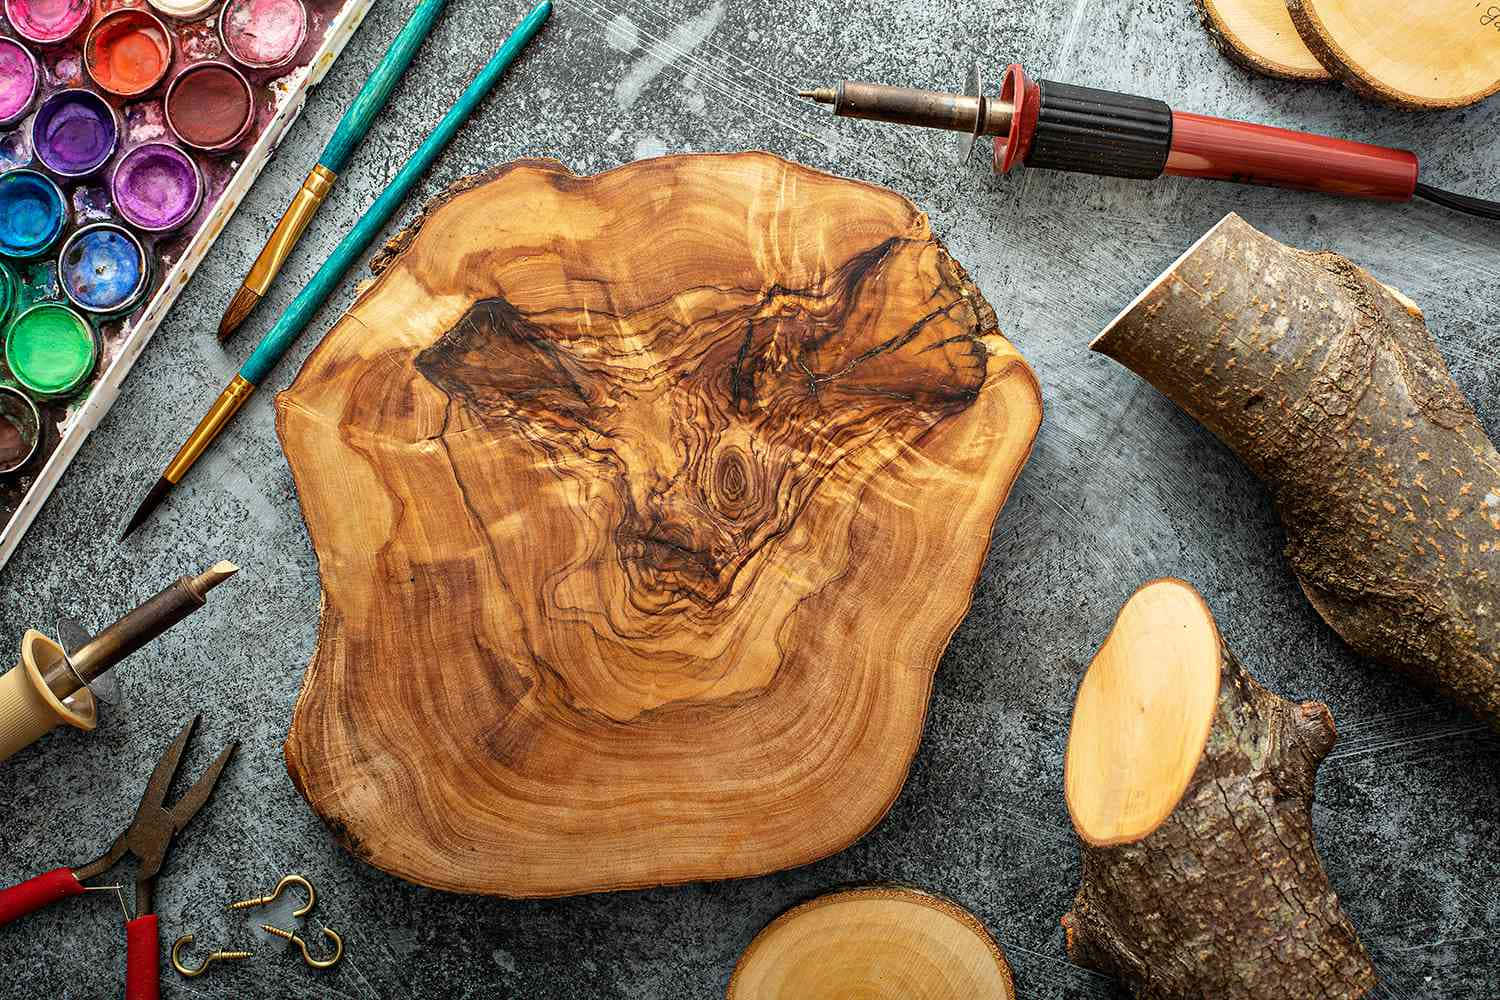 Brightly glowing coals and intricate designs fill the artist's wood burning masterpiece